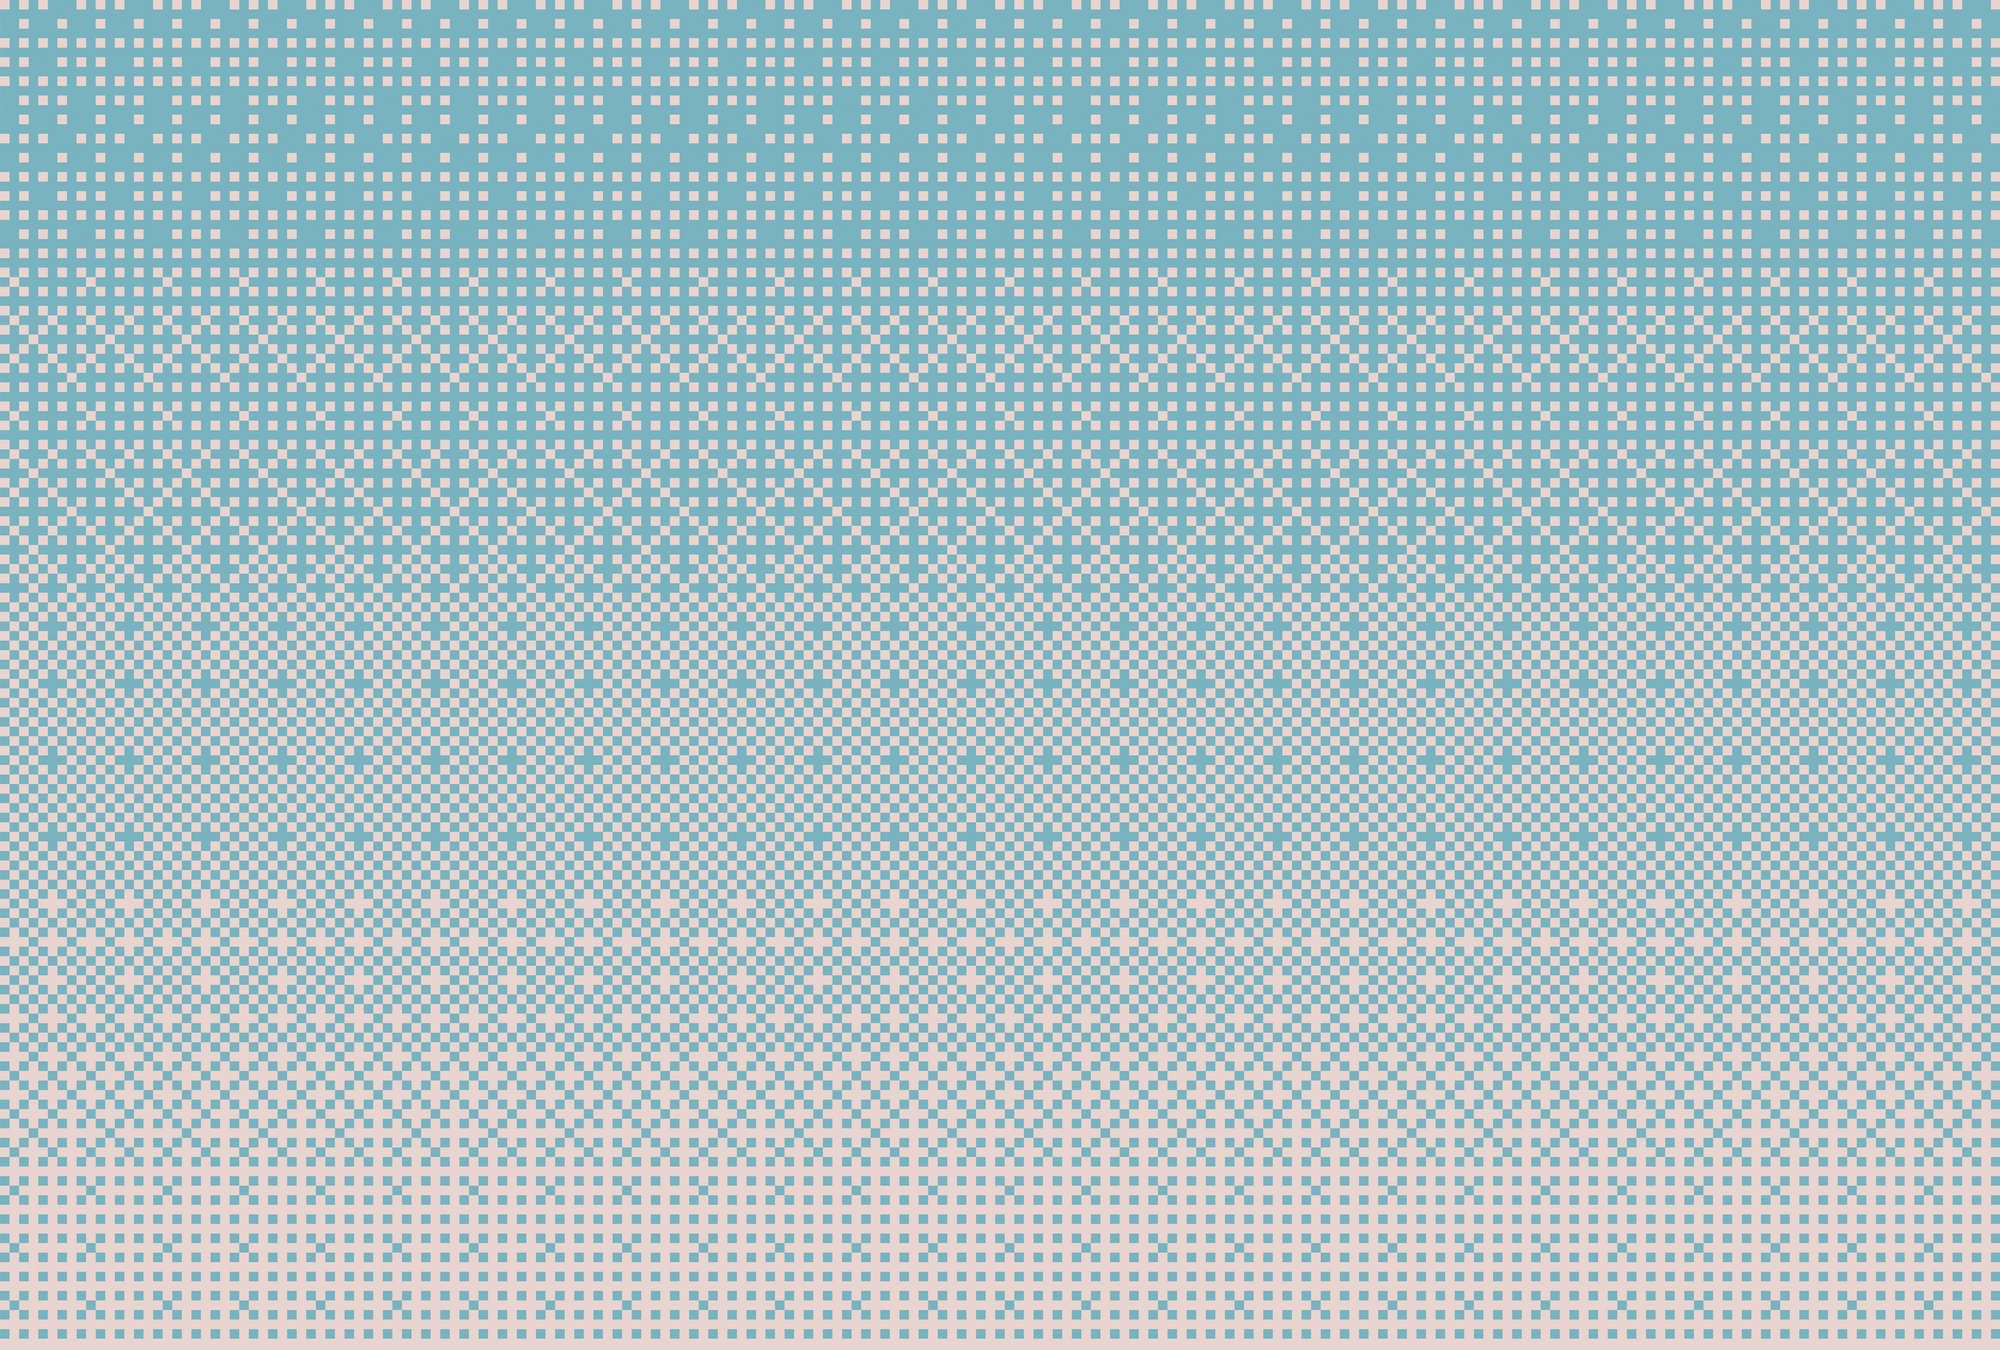             Photo wallpaper »pixi blue« - Cross stitch pattern with pixel style - Blue | Light textured non-woven
        